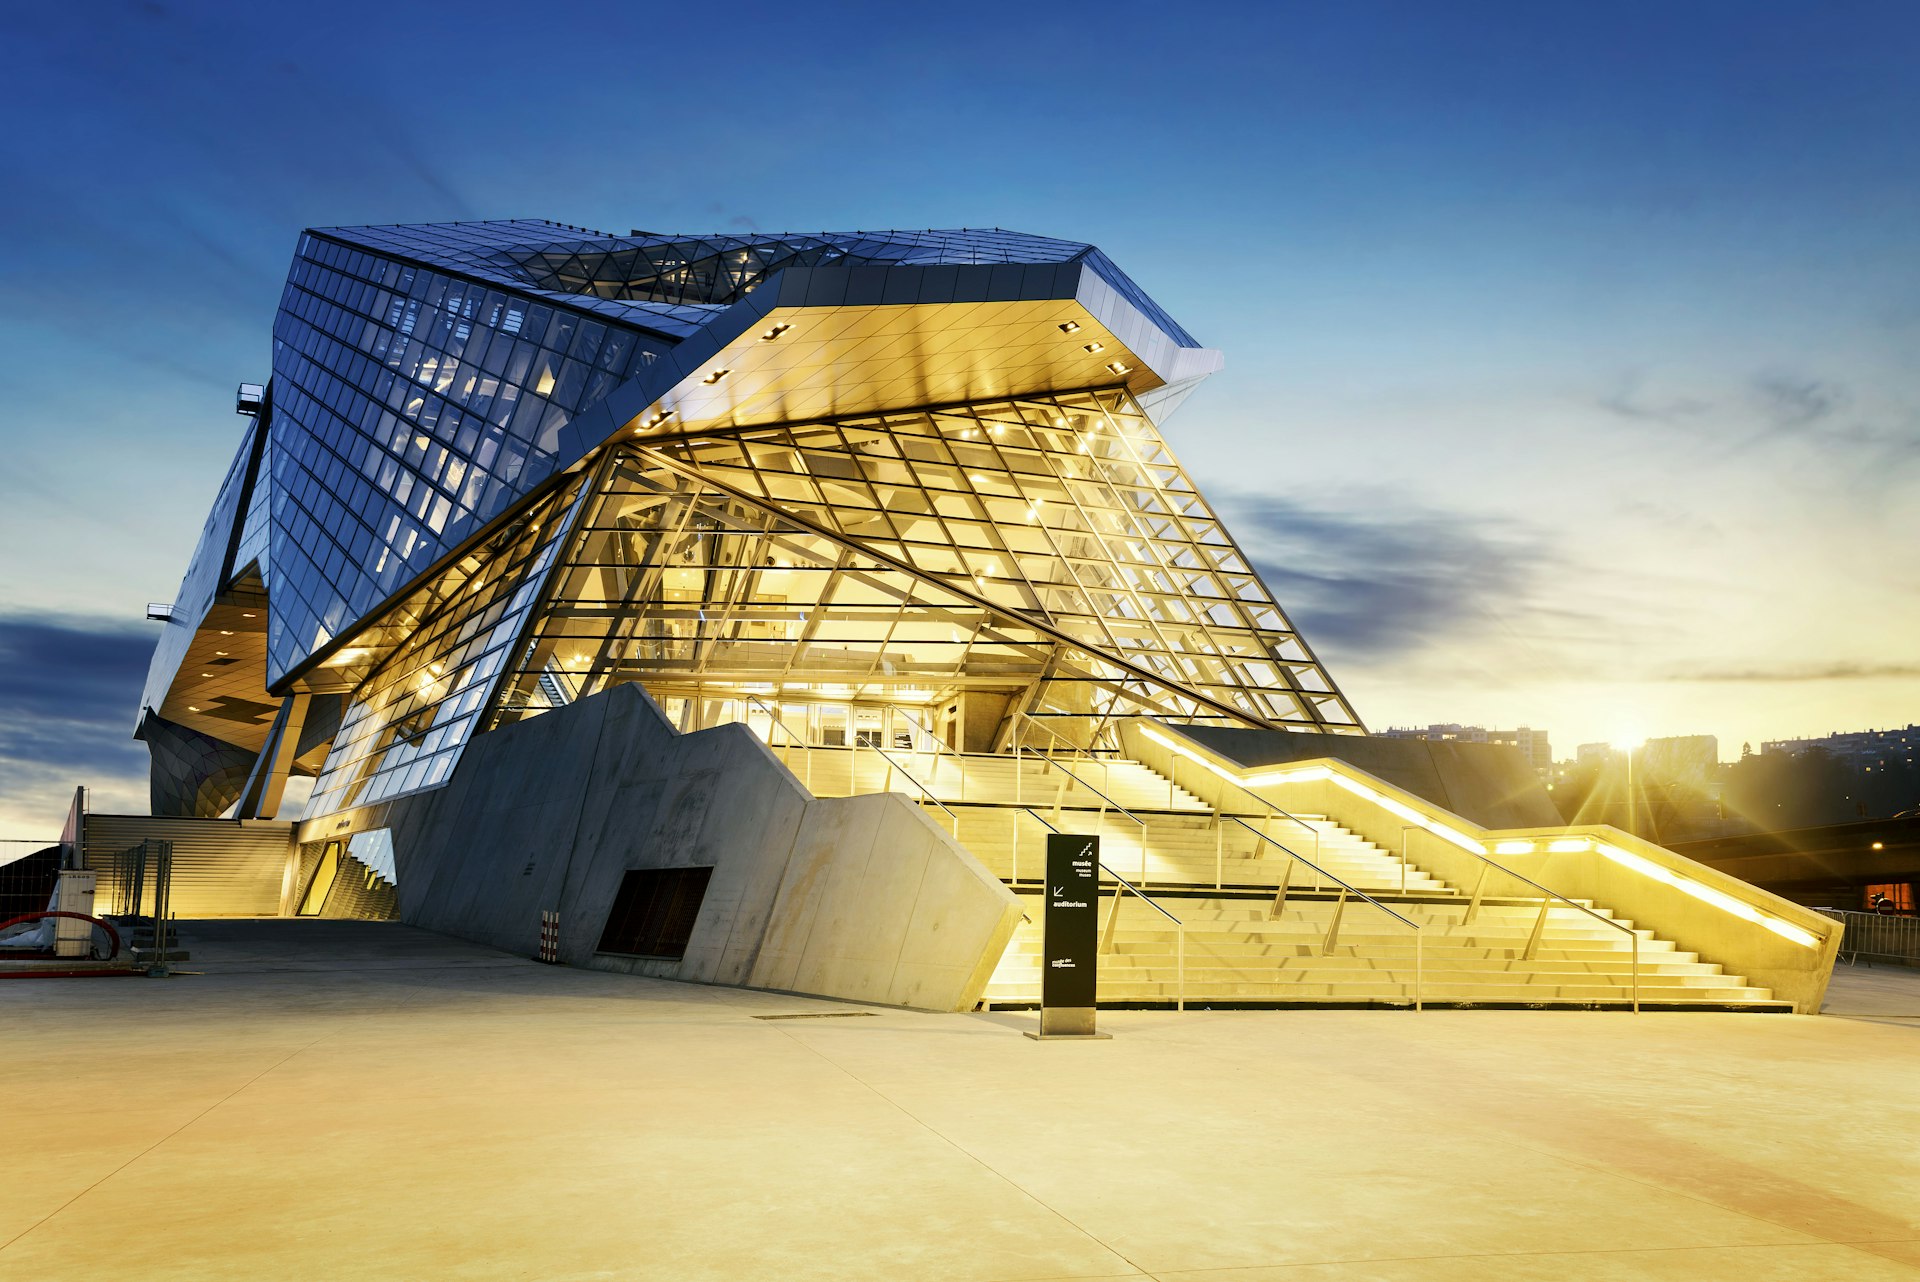 An exterior shot of the glass-and-steel Musee des Confluences in Lyon